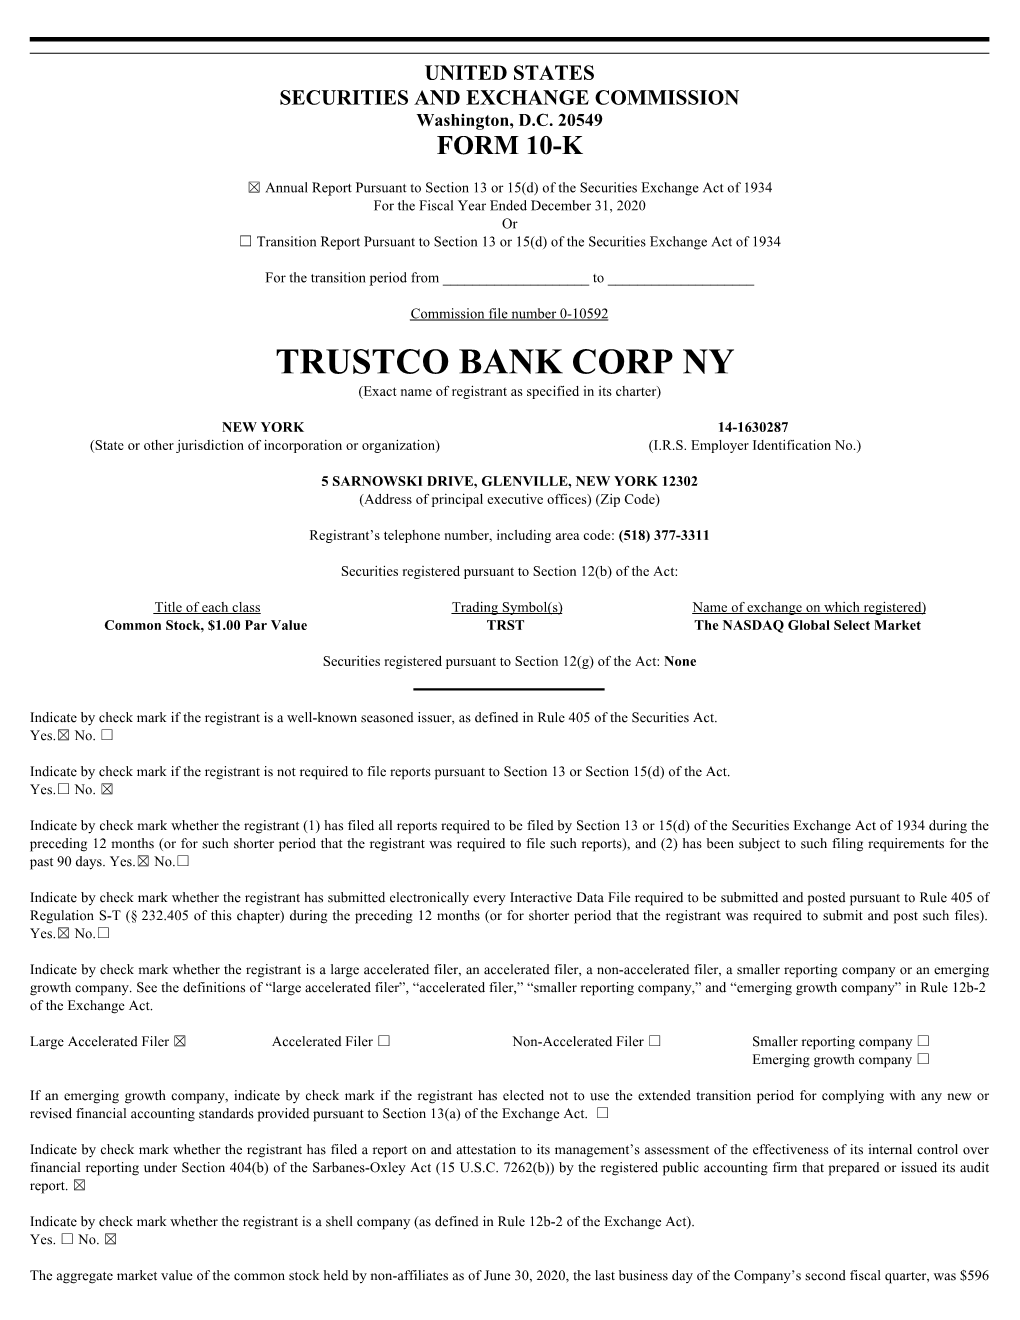 TRUSTCO BANK CORP NY (Exact Name of Registrant As Specified in Its Charter)